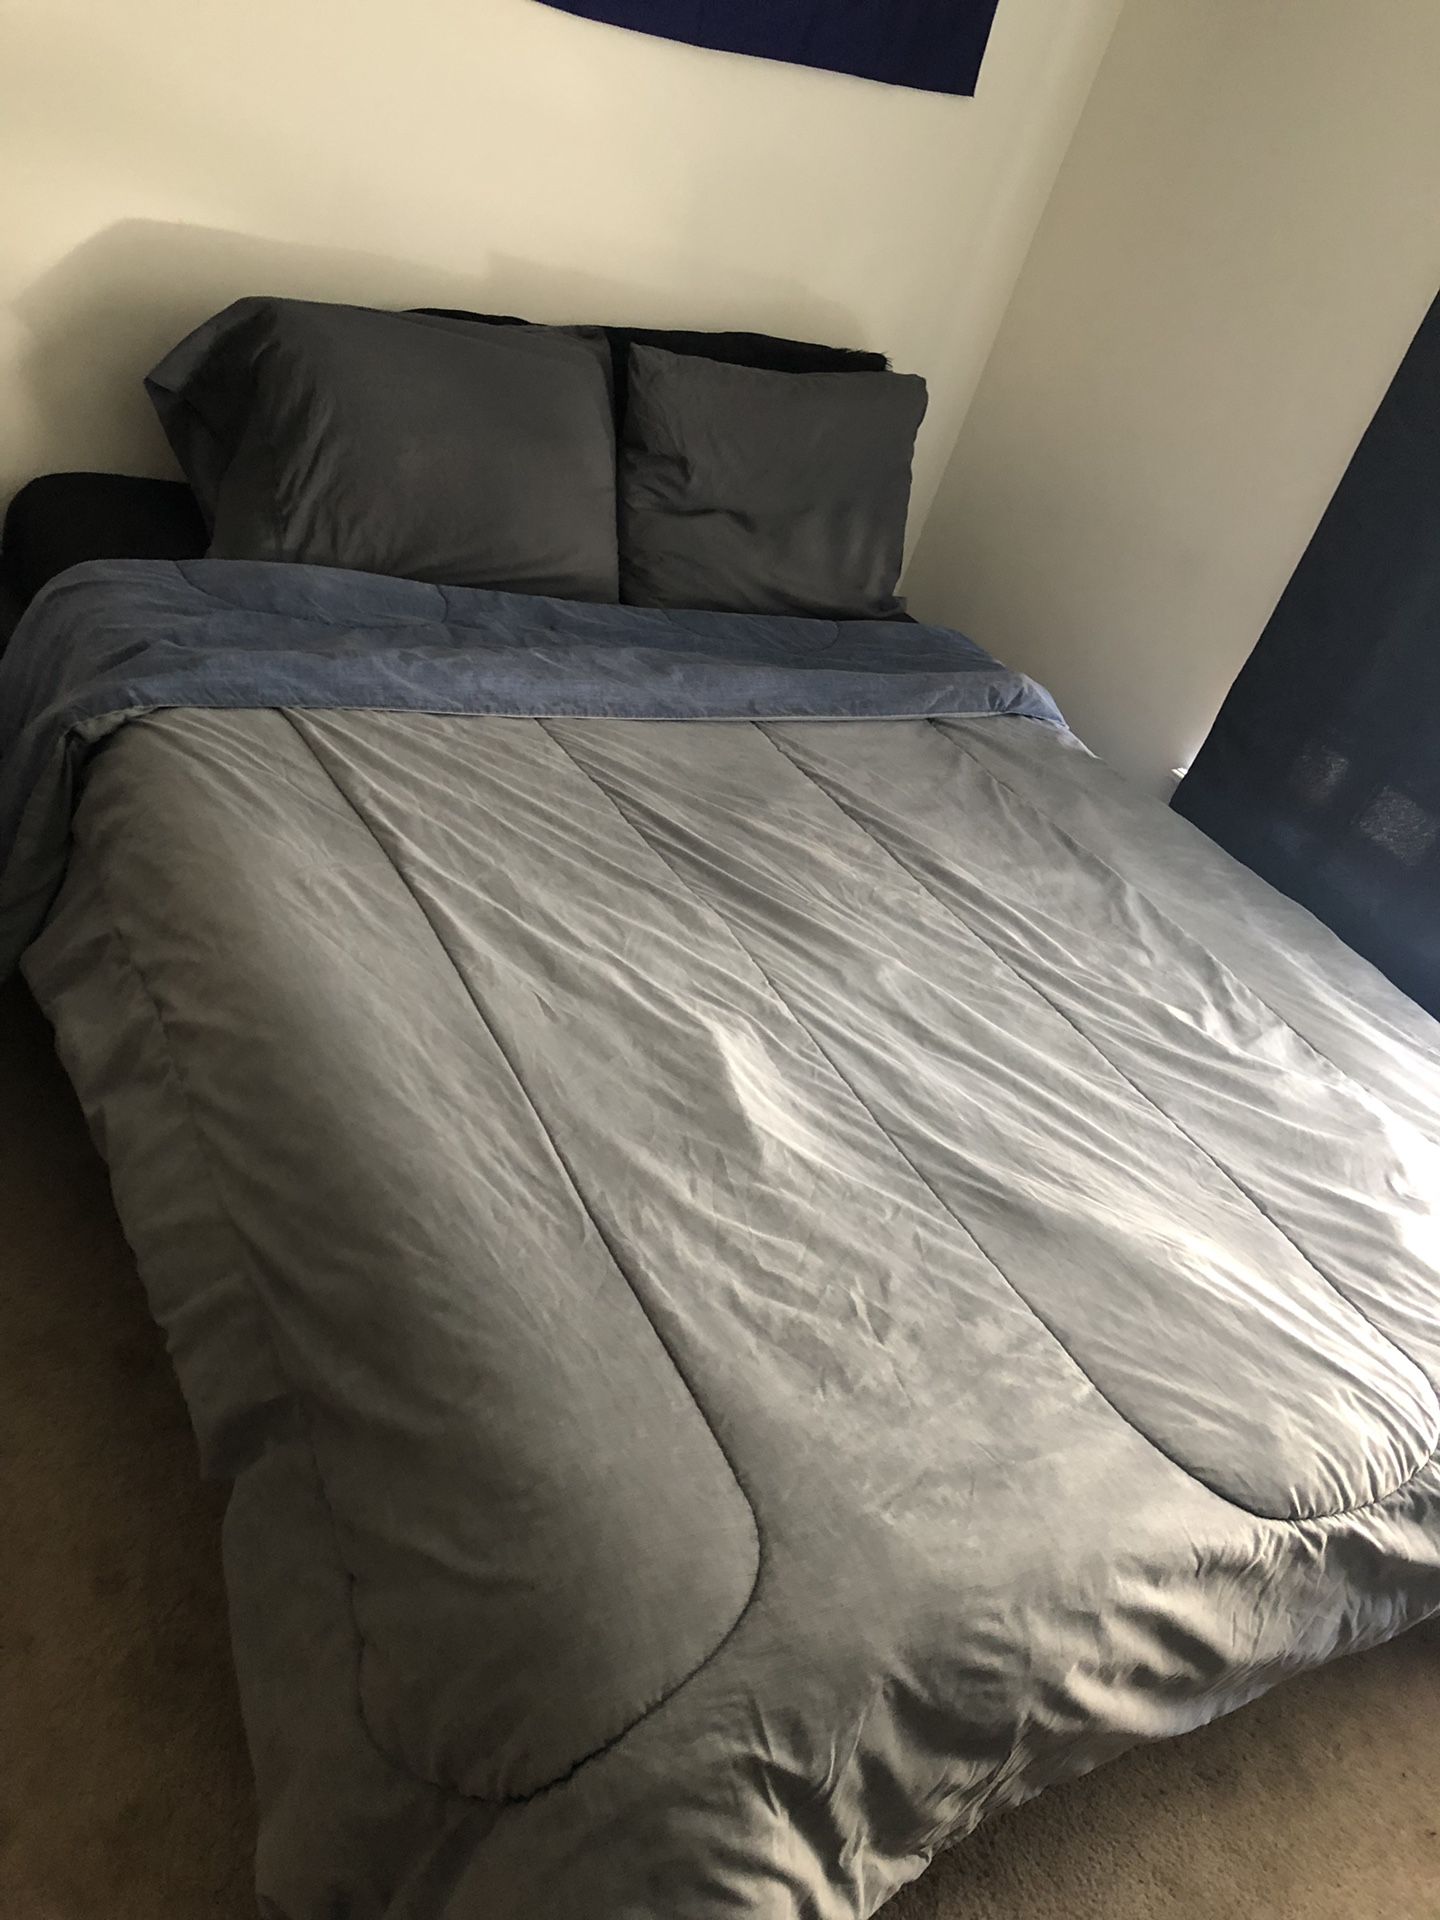 Queen bed, mattress bed frame and stand